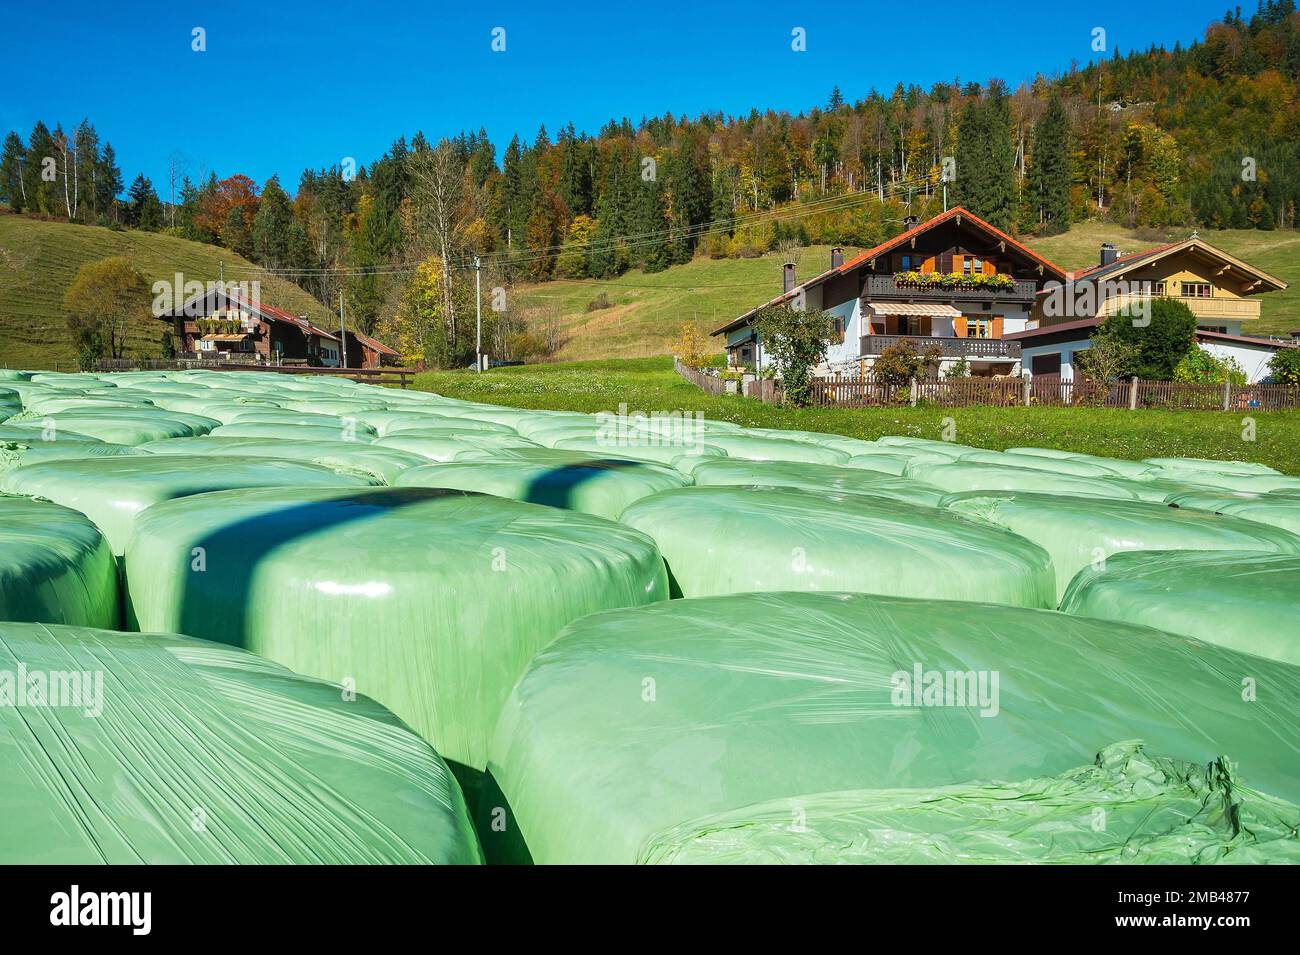 Green hay silage bales and mixed forest, Jachenau, Bavaria, Germany Stock Photo